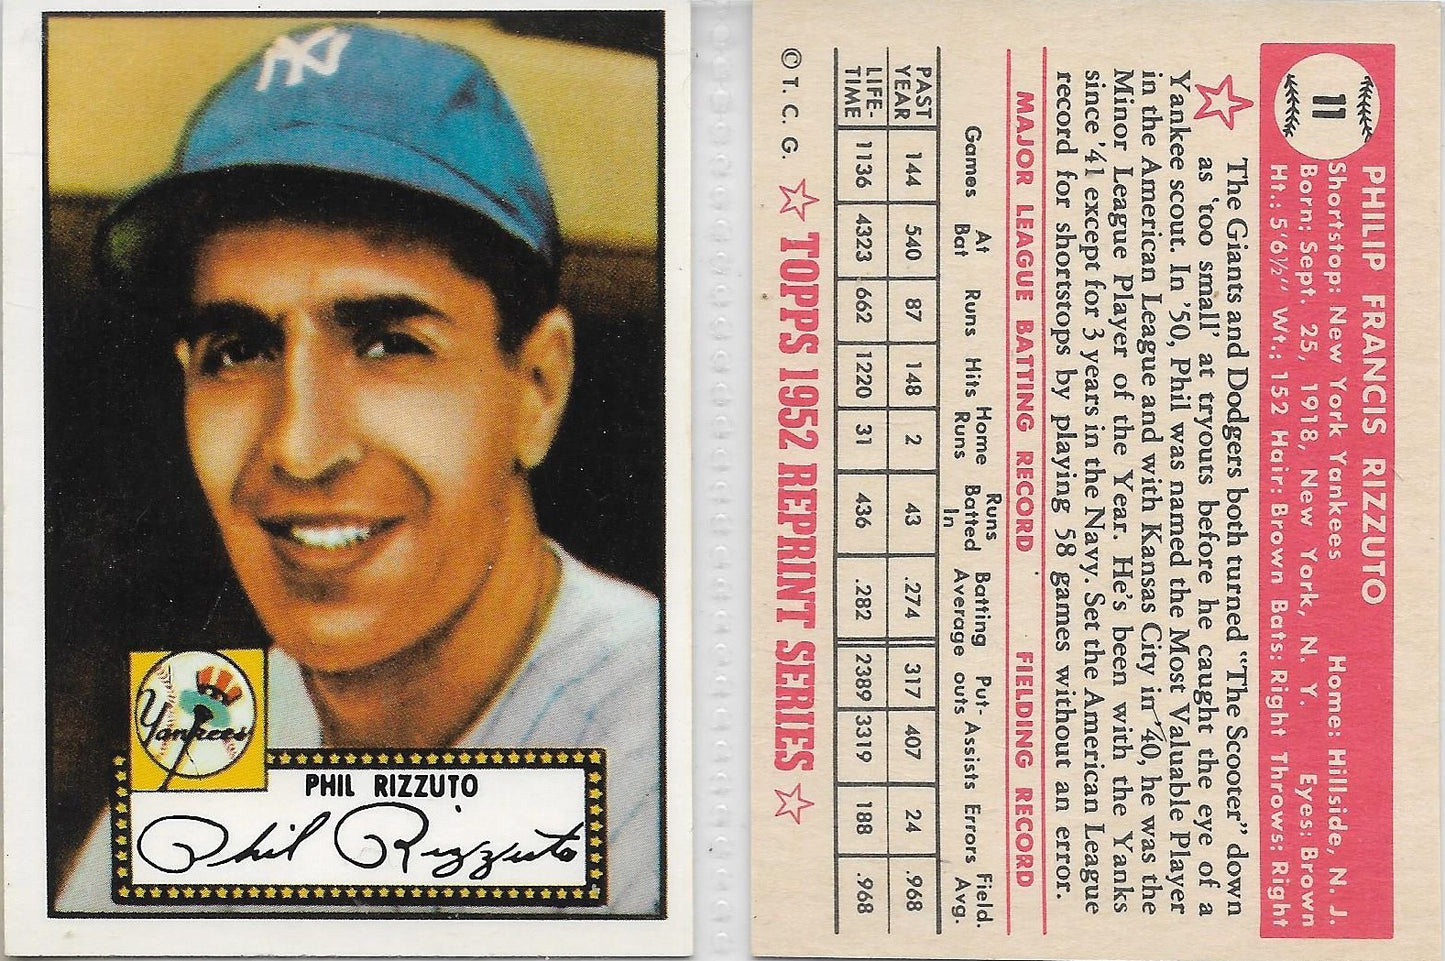 1983 TOPPS '52 REPRINT CARDS STARS - PHIL RIZZUTO - NEW YORK YANKEES #11 ROOKIE CARD